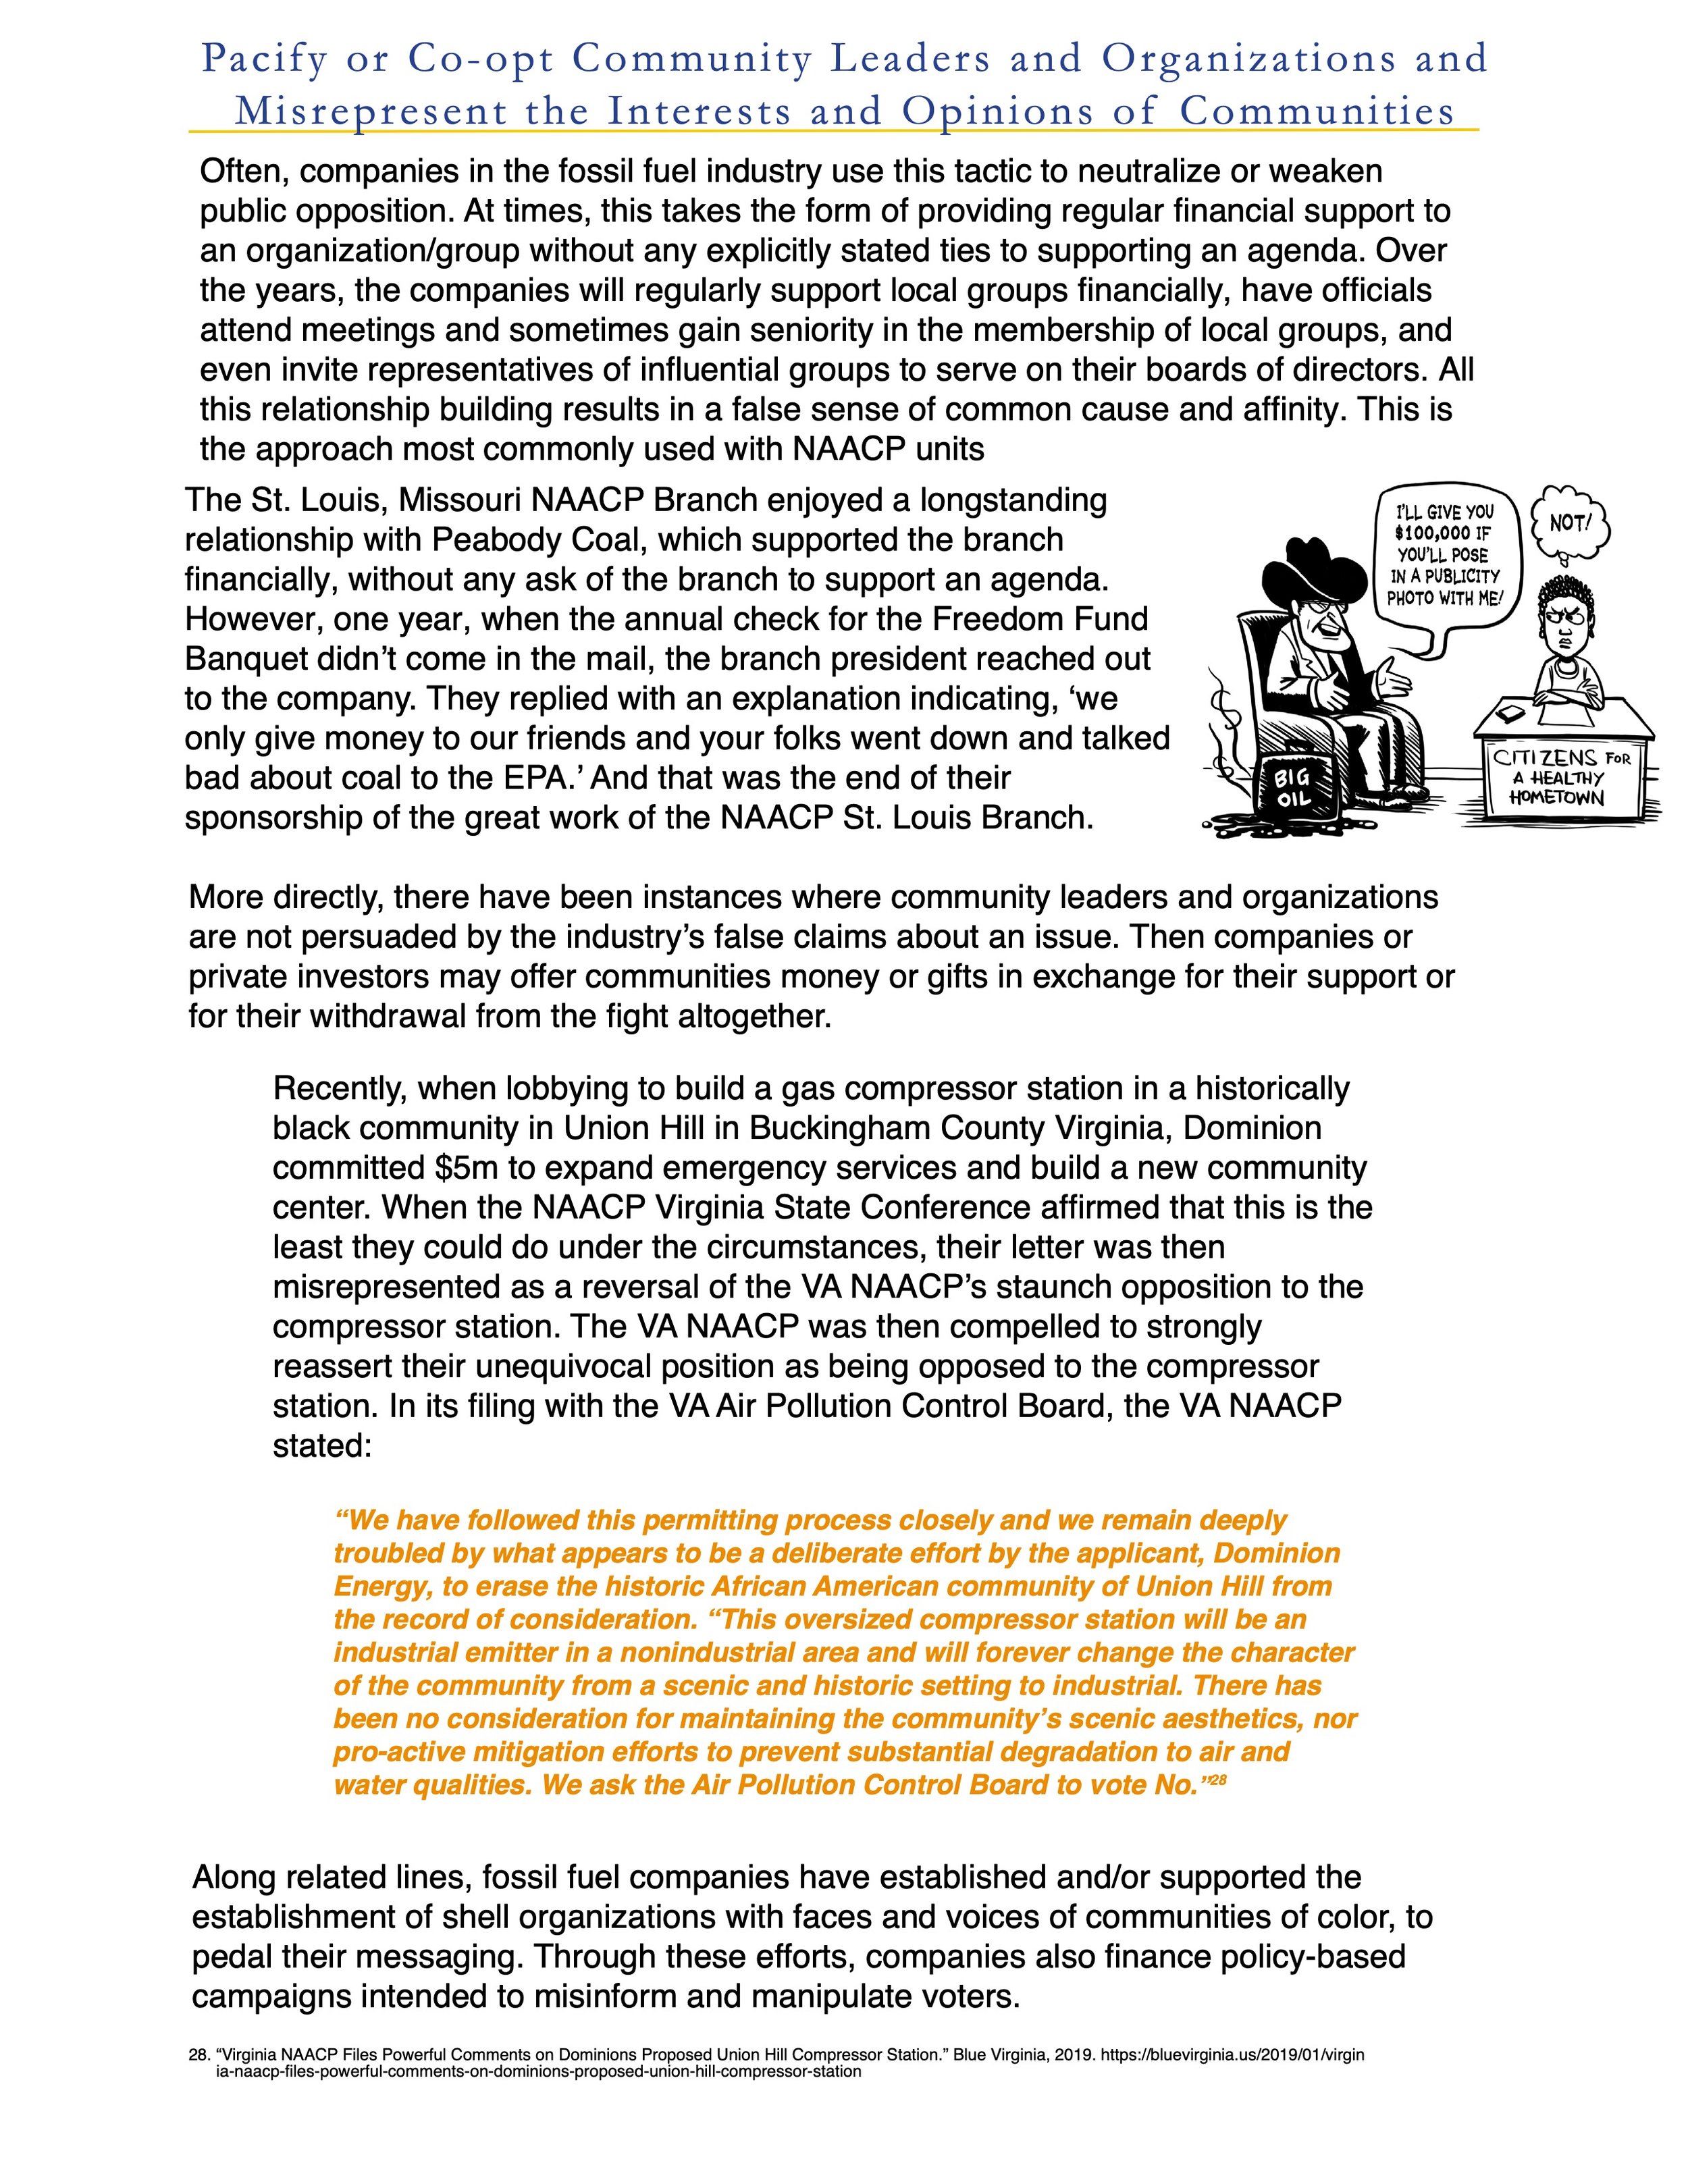 Fossil-Fueled-Foolery-An-Illustrated-Primer-on-the-Top-10-Manipulation-Tactics-of-the-Fossil-Fuel-Industry 12.jpeg